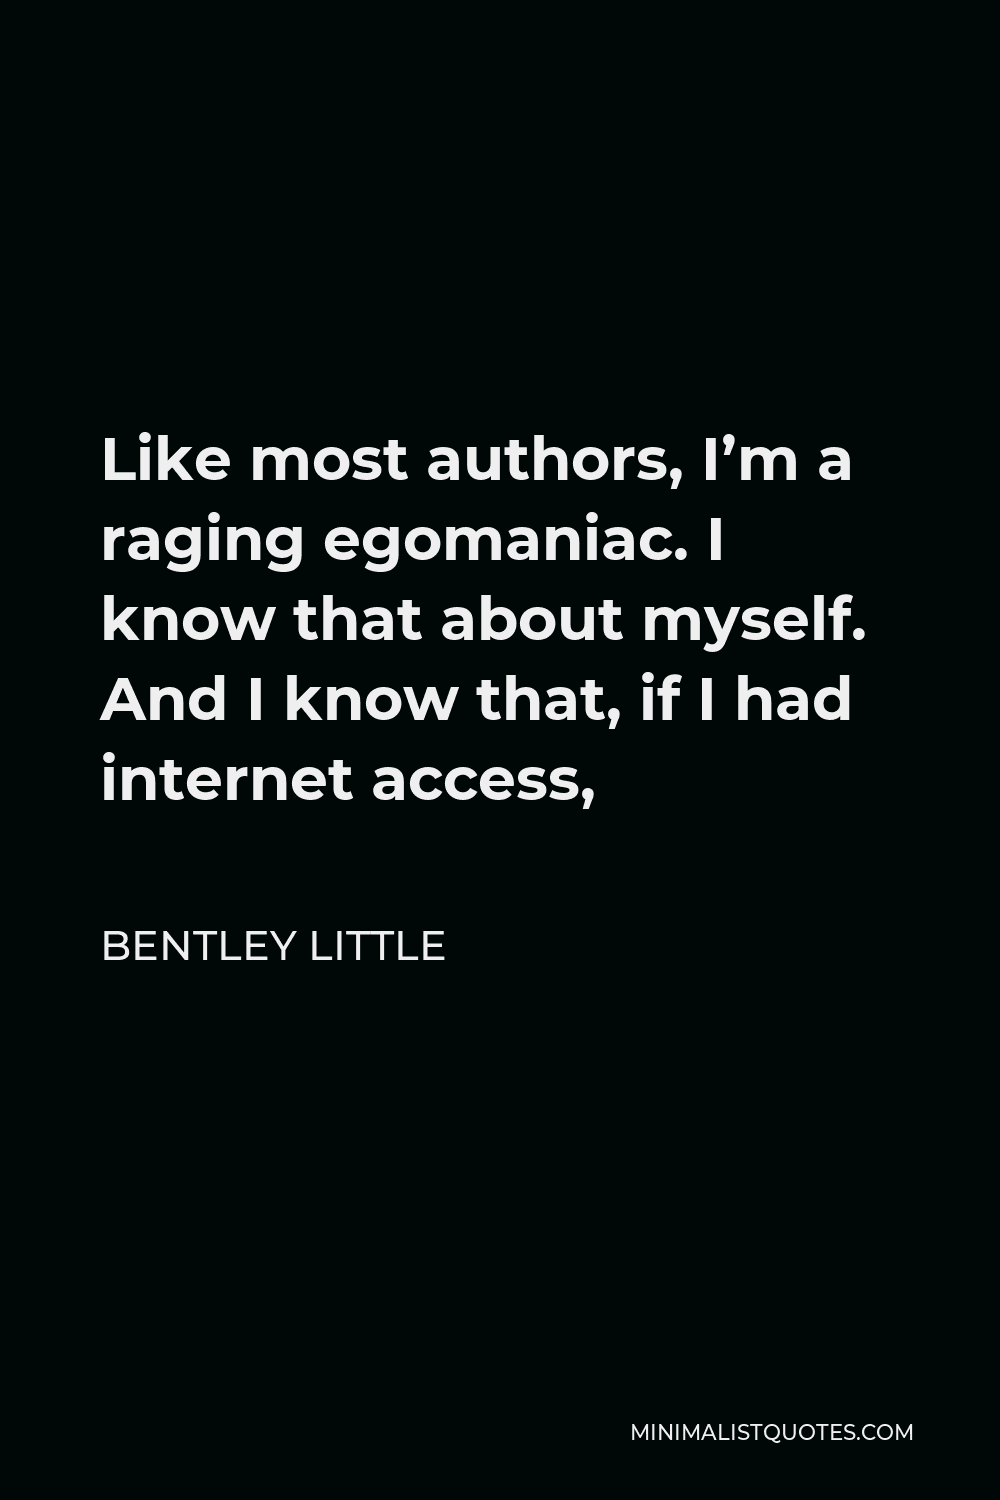 Bentley Little Quote - Like most authors, I’m a raging egomaniac. I know that about myself. And I know that, if I had internet access,